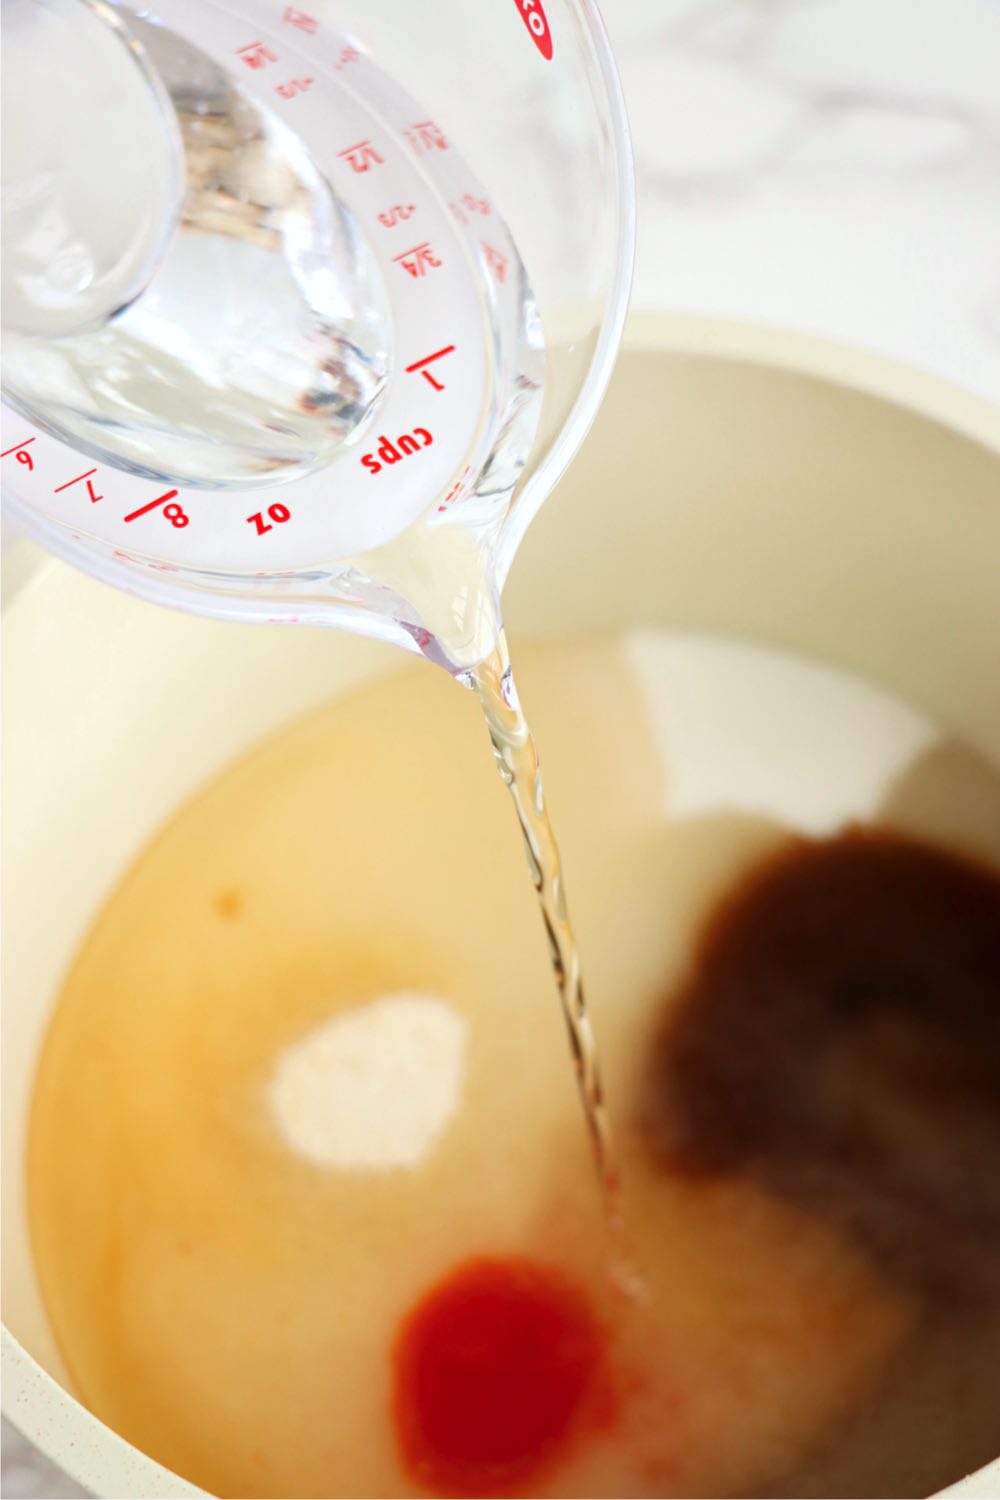 Pouring vinegar from a measuring cup into a bowl filled with sugar, Worcestershire sauce and other ingredients